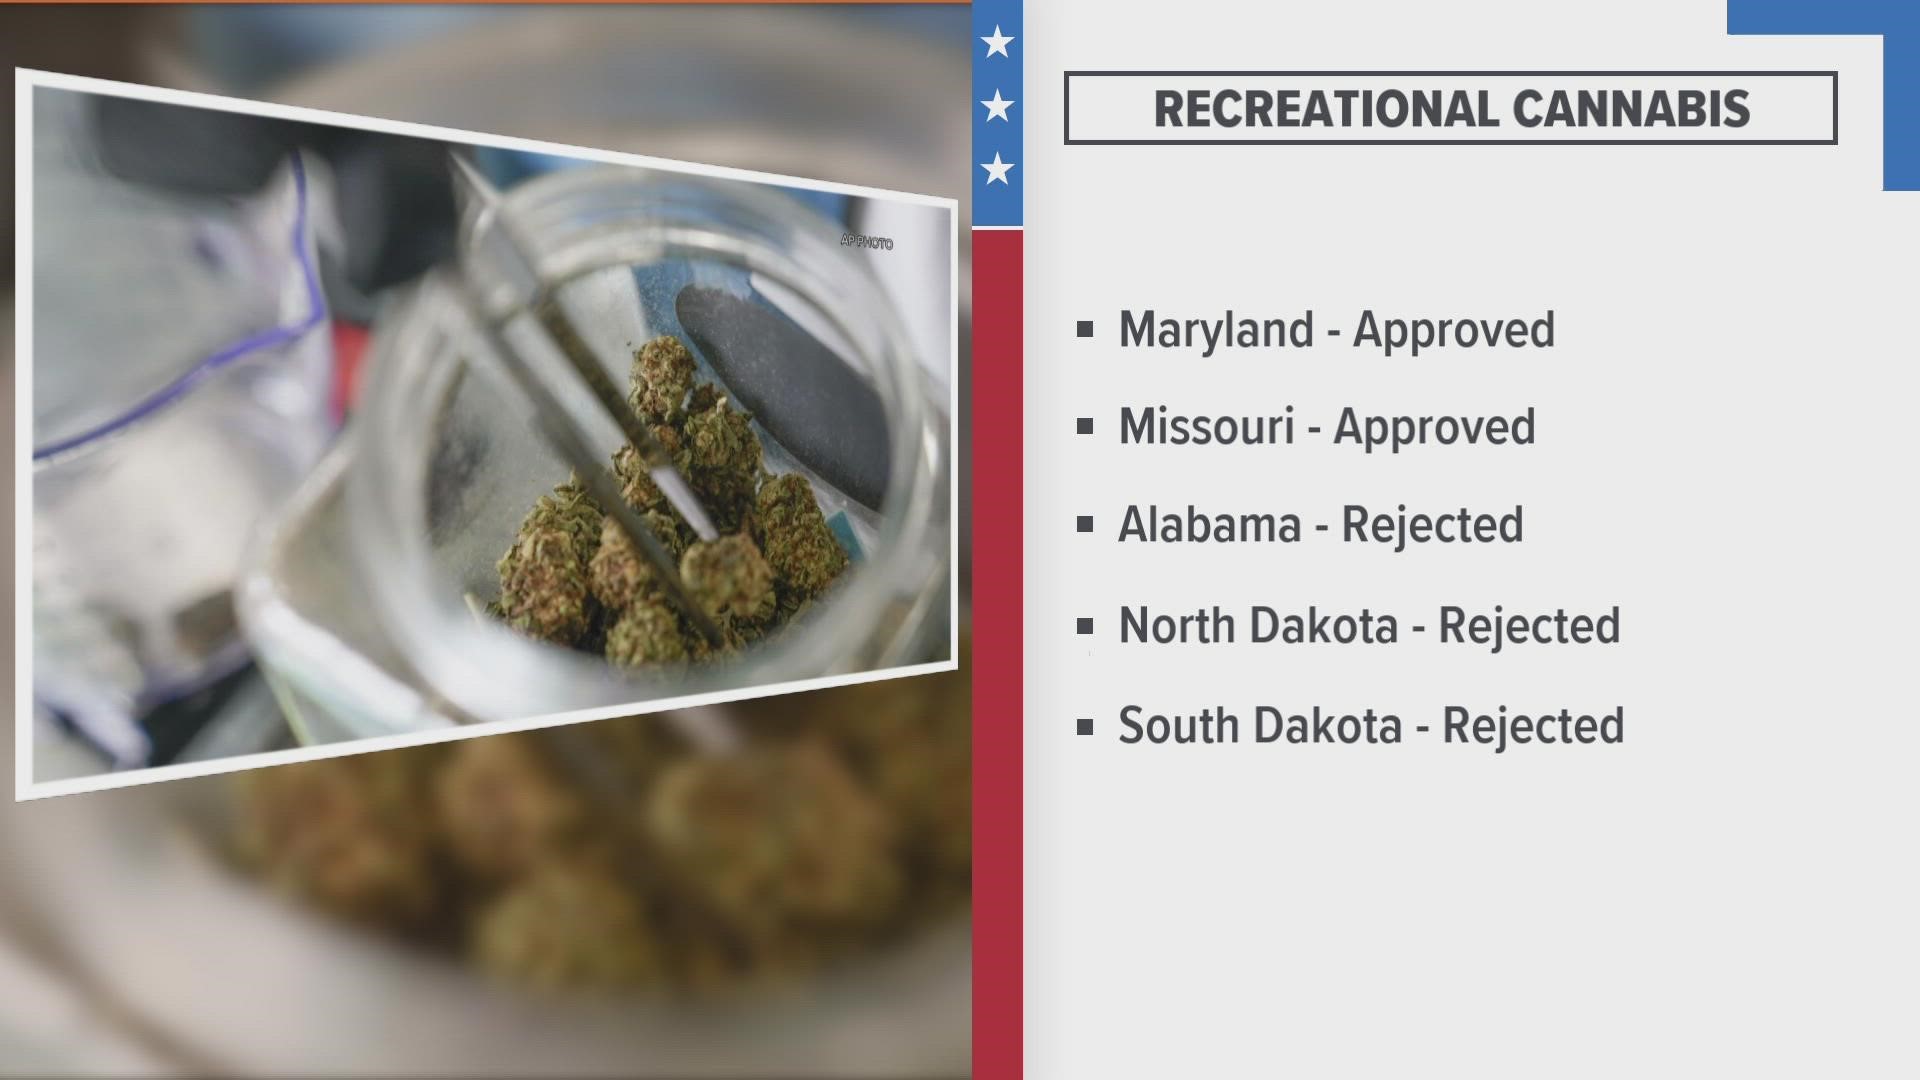 Recreational cannabis was approved in Maryland and Missouri, and rejected in Alabama, North Dakota, and South Dakota.